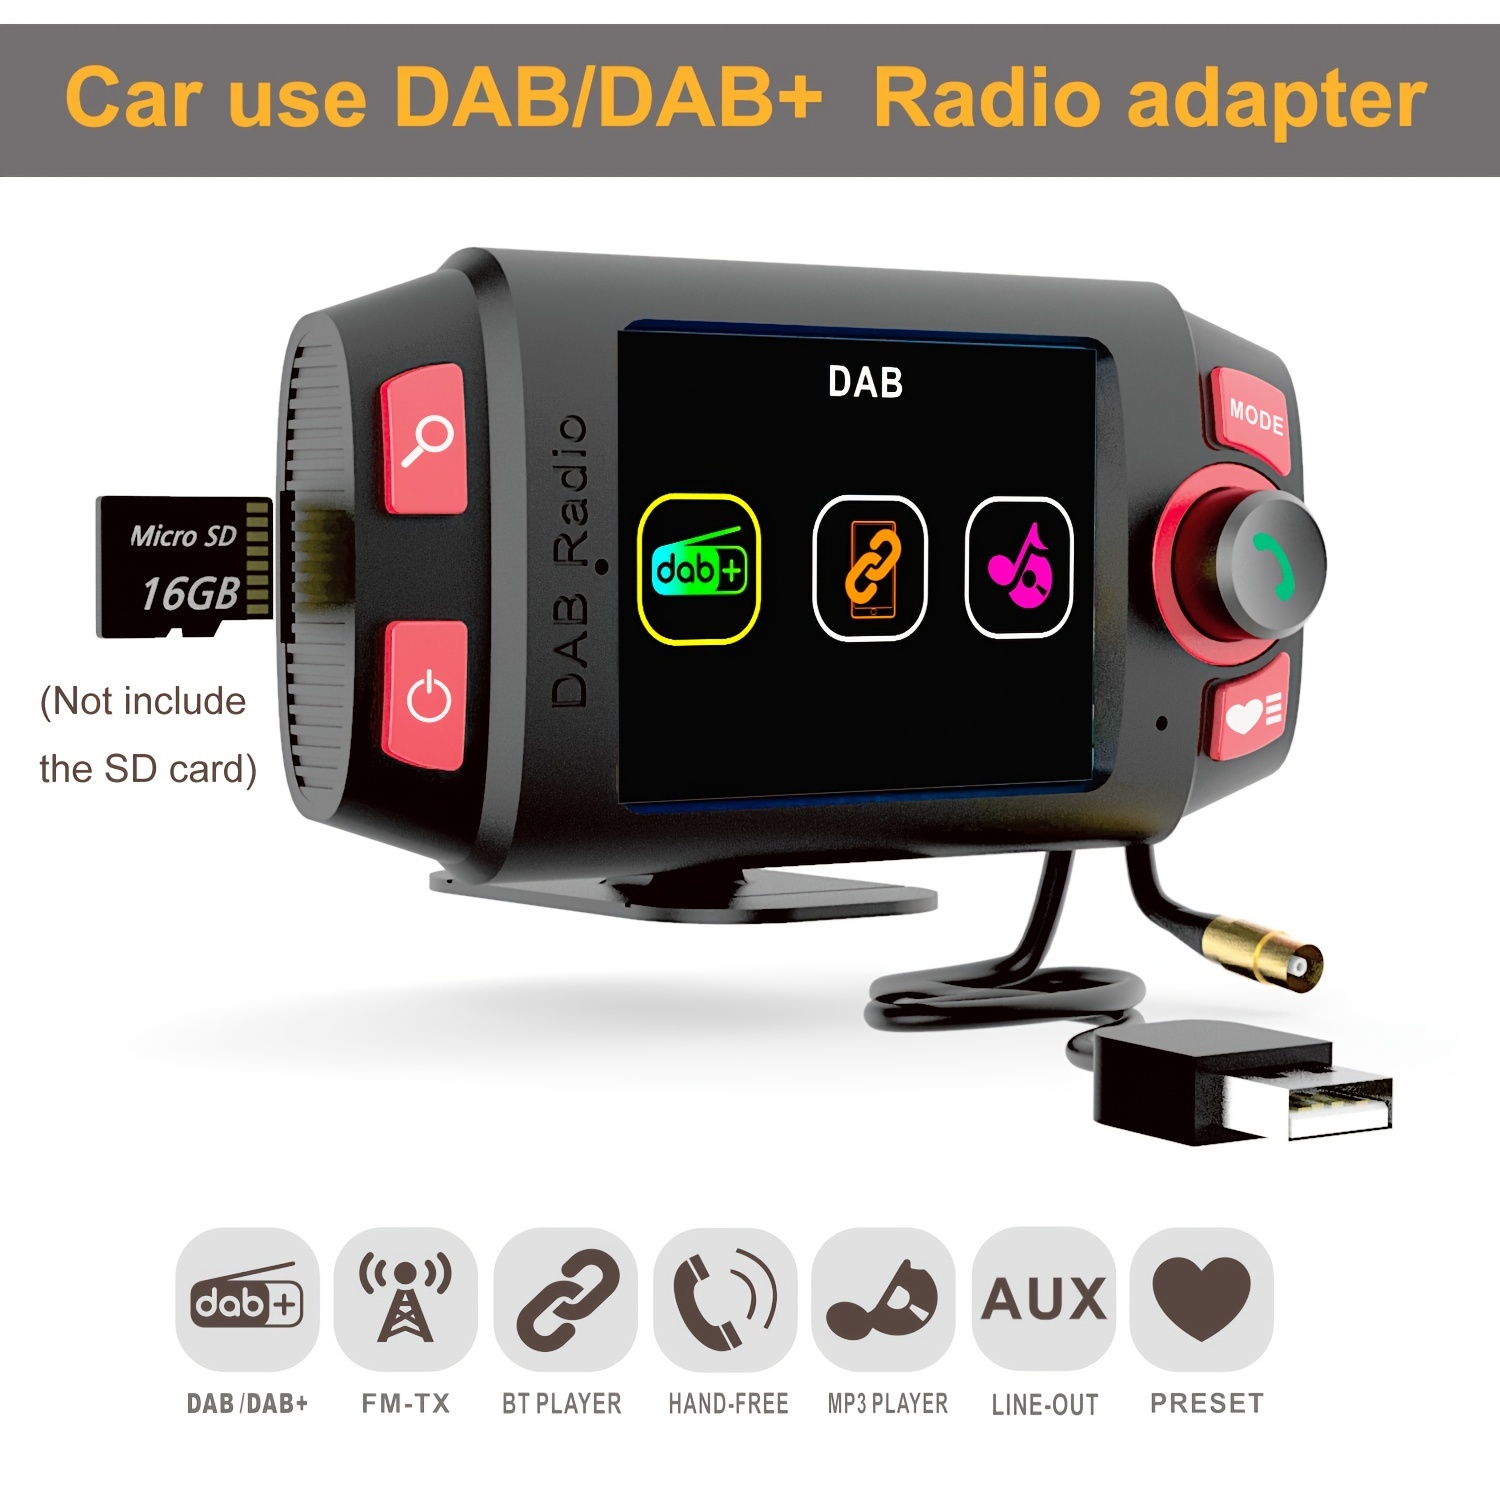 2.4 Inch Colorful Display Car DAB+/DAB Radio Adapter FM Transmitter,with BT  Hands-free And Music Playback Car Kit Mp3 Player Car Use DAB Radio Receive